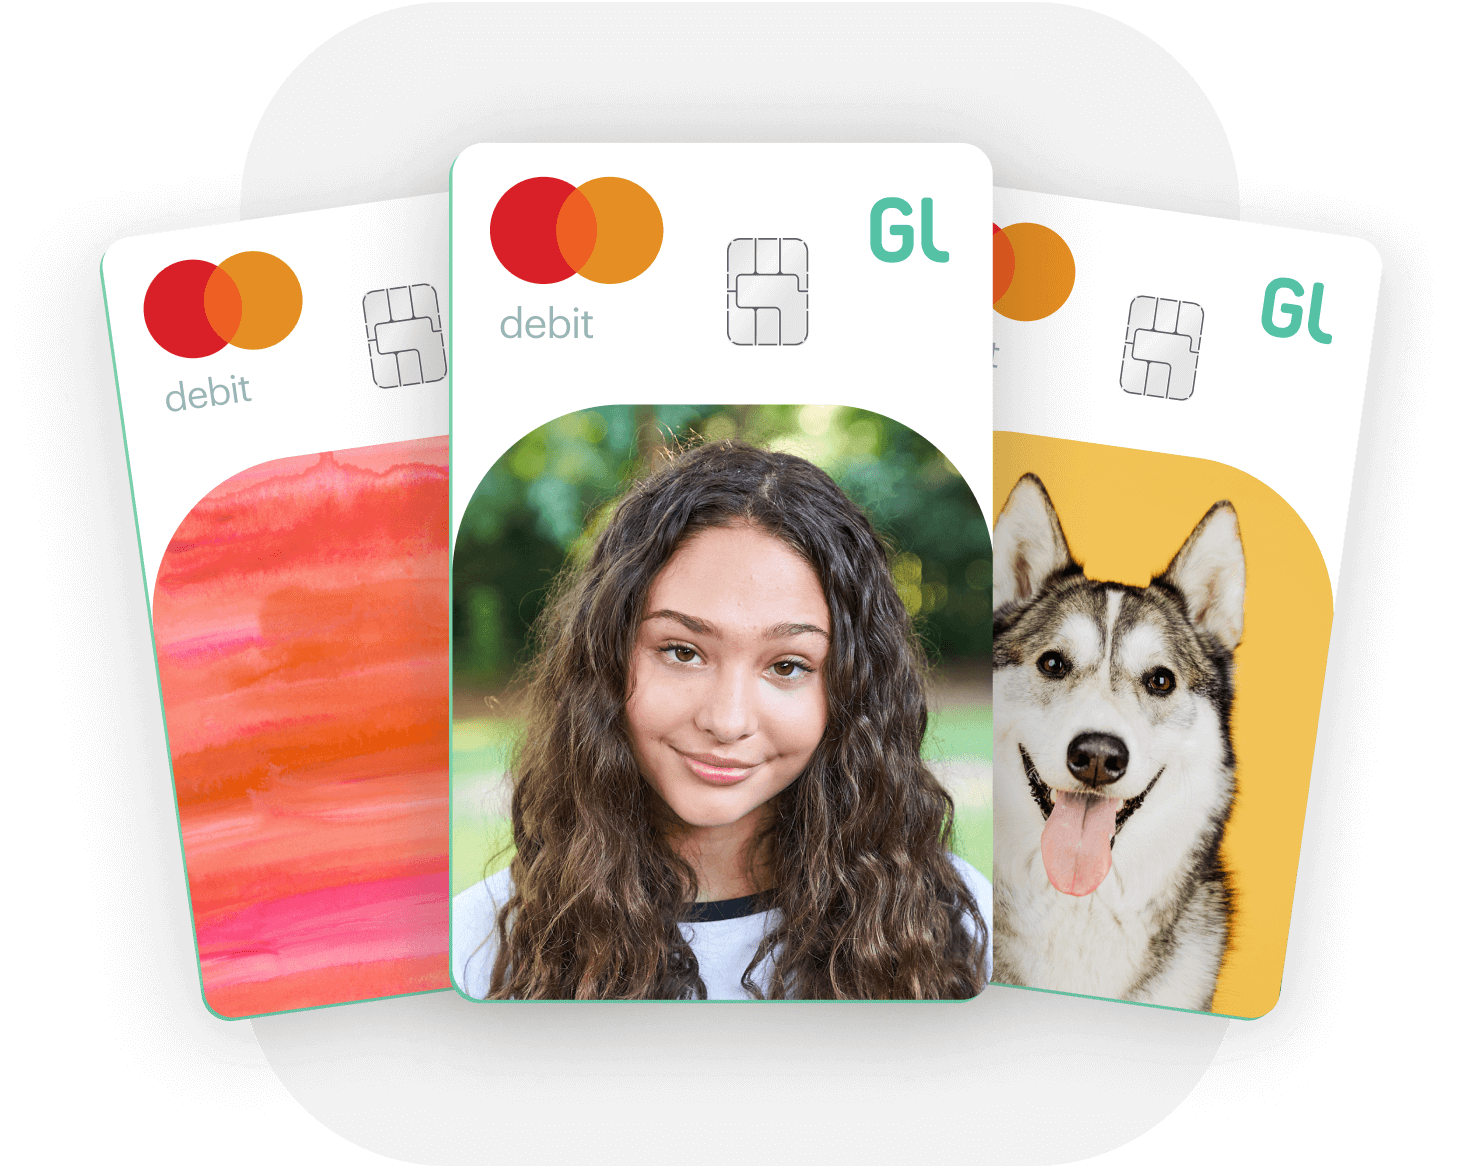 custom greenlight debit cards showing a colorful gradient, teen girl, and pet dog